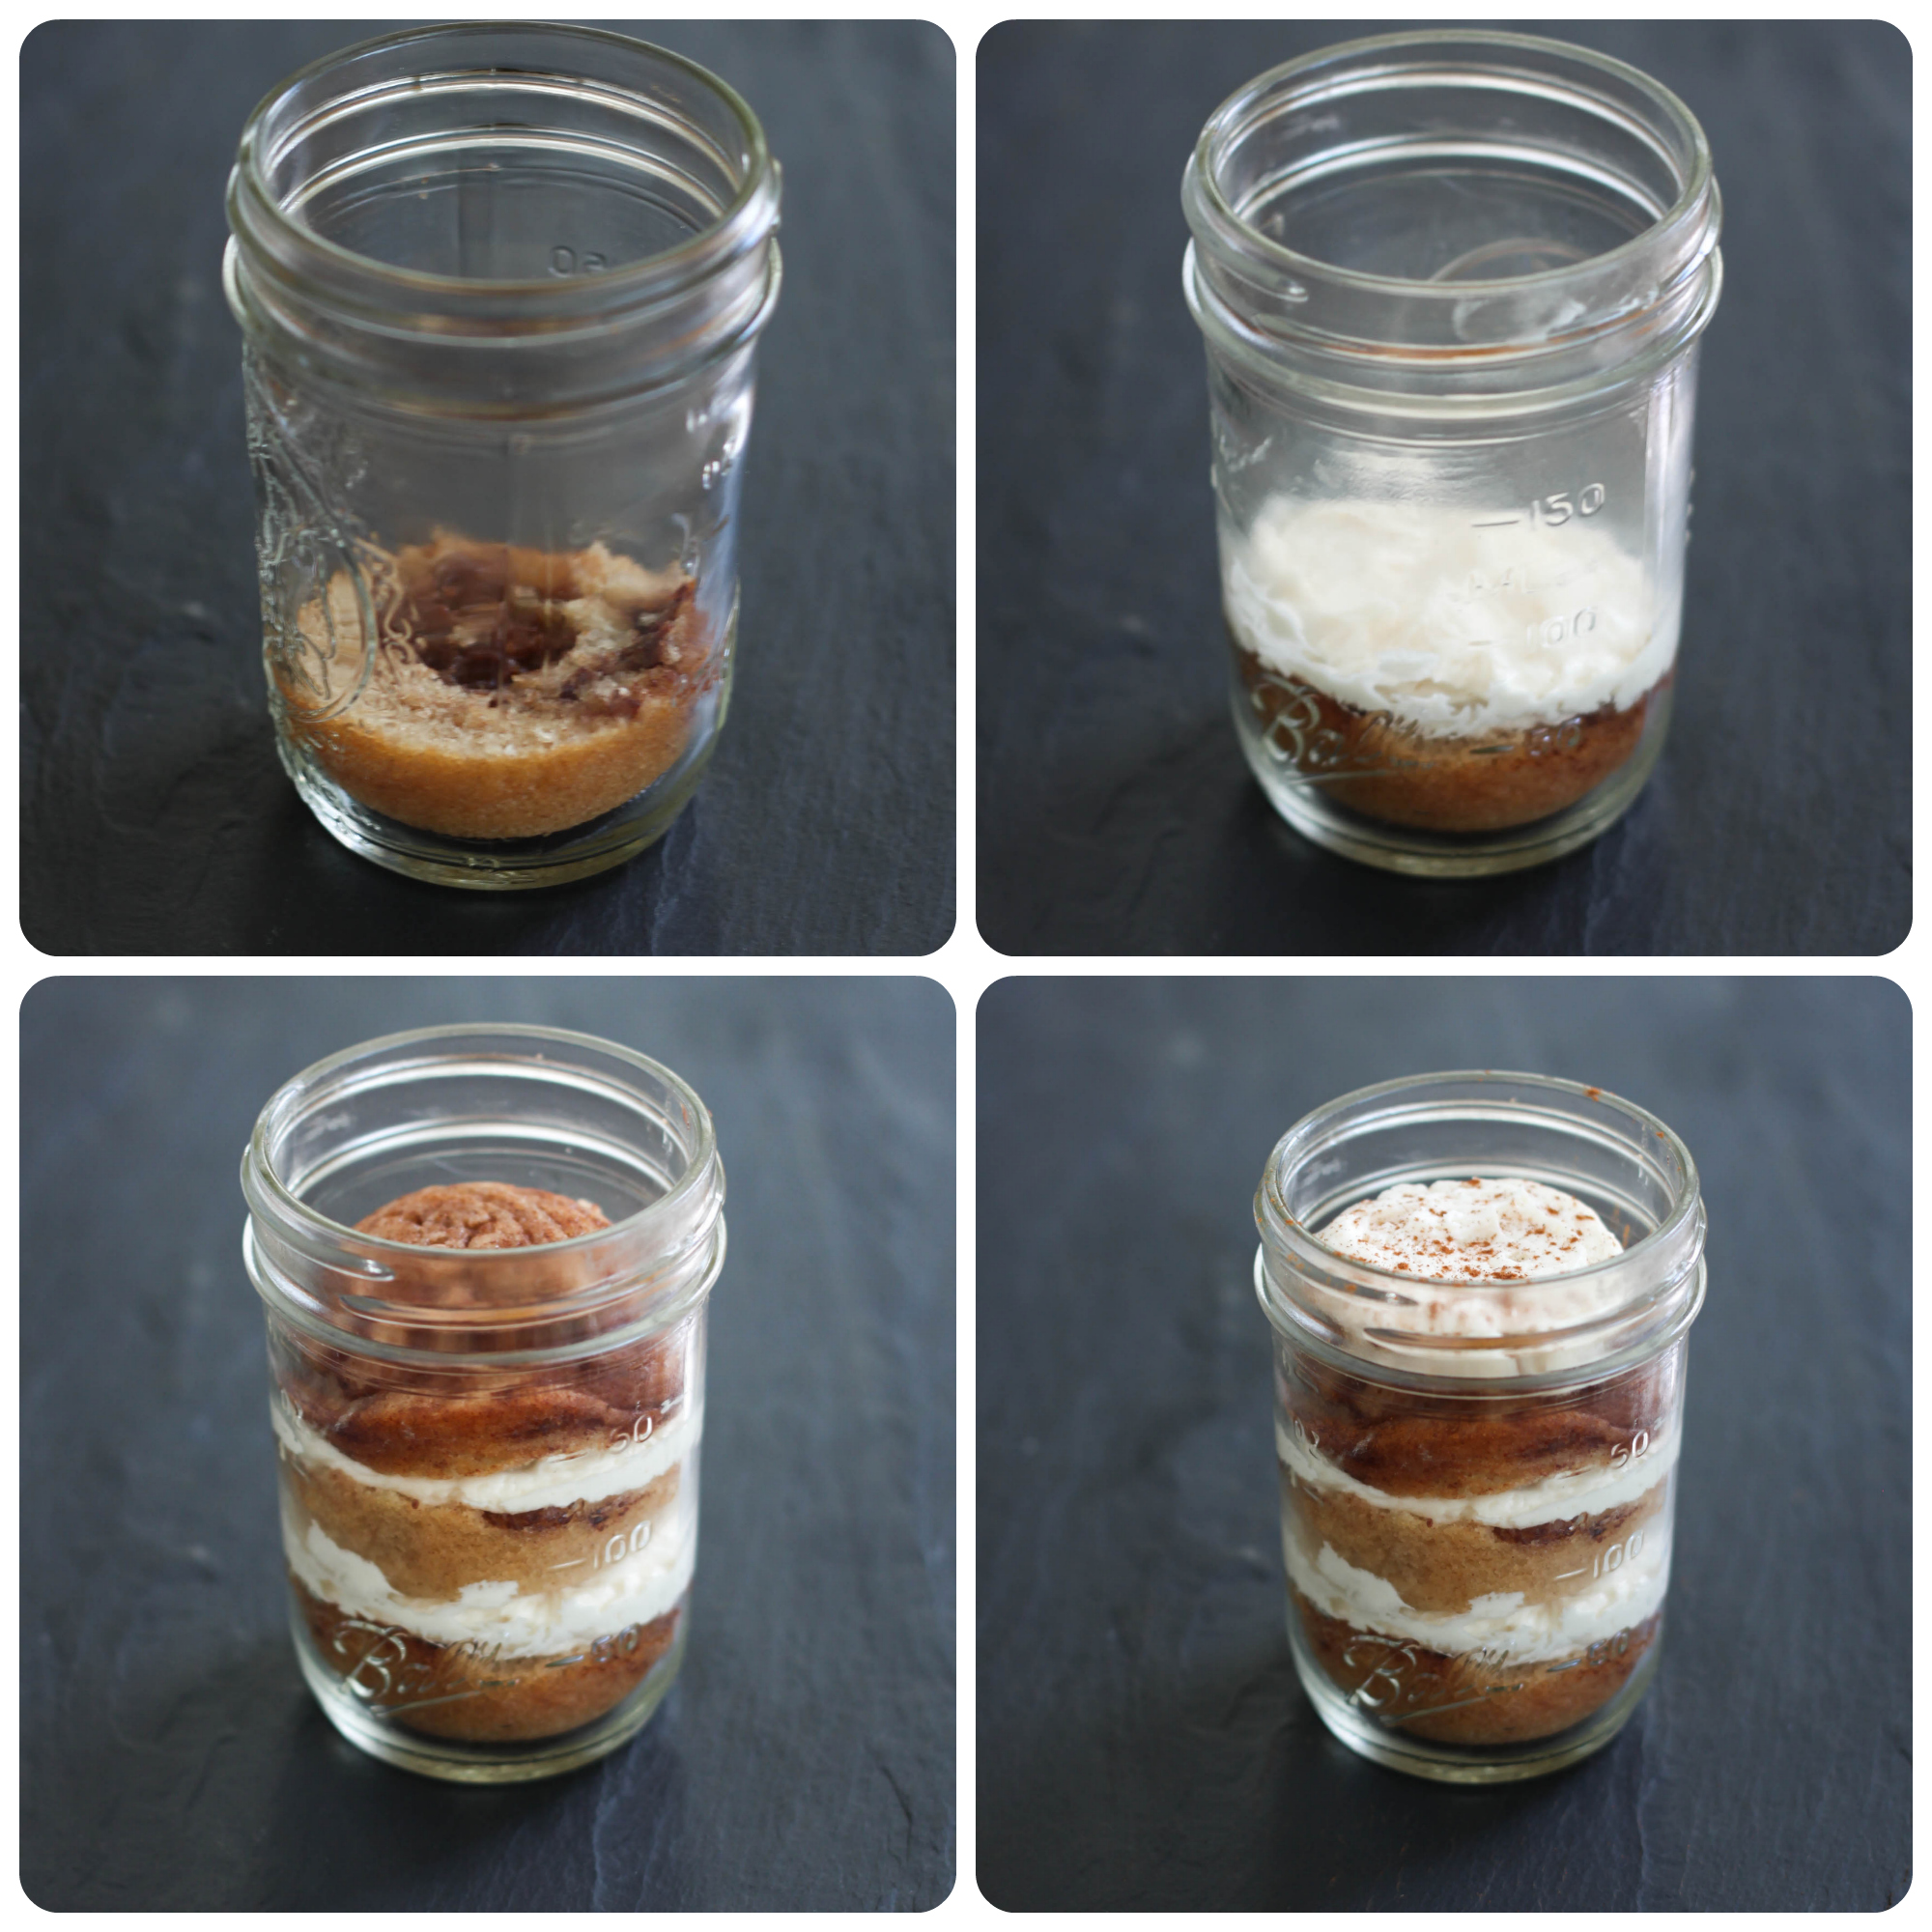 How to assemble a cupcake in a jar